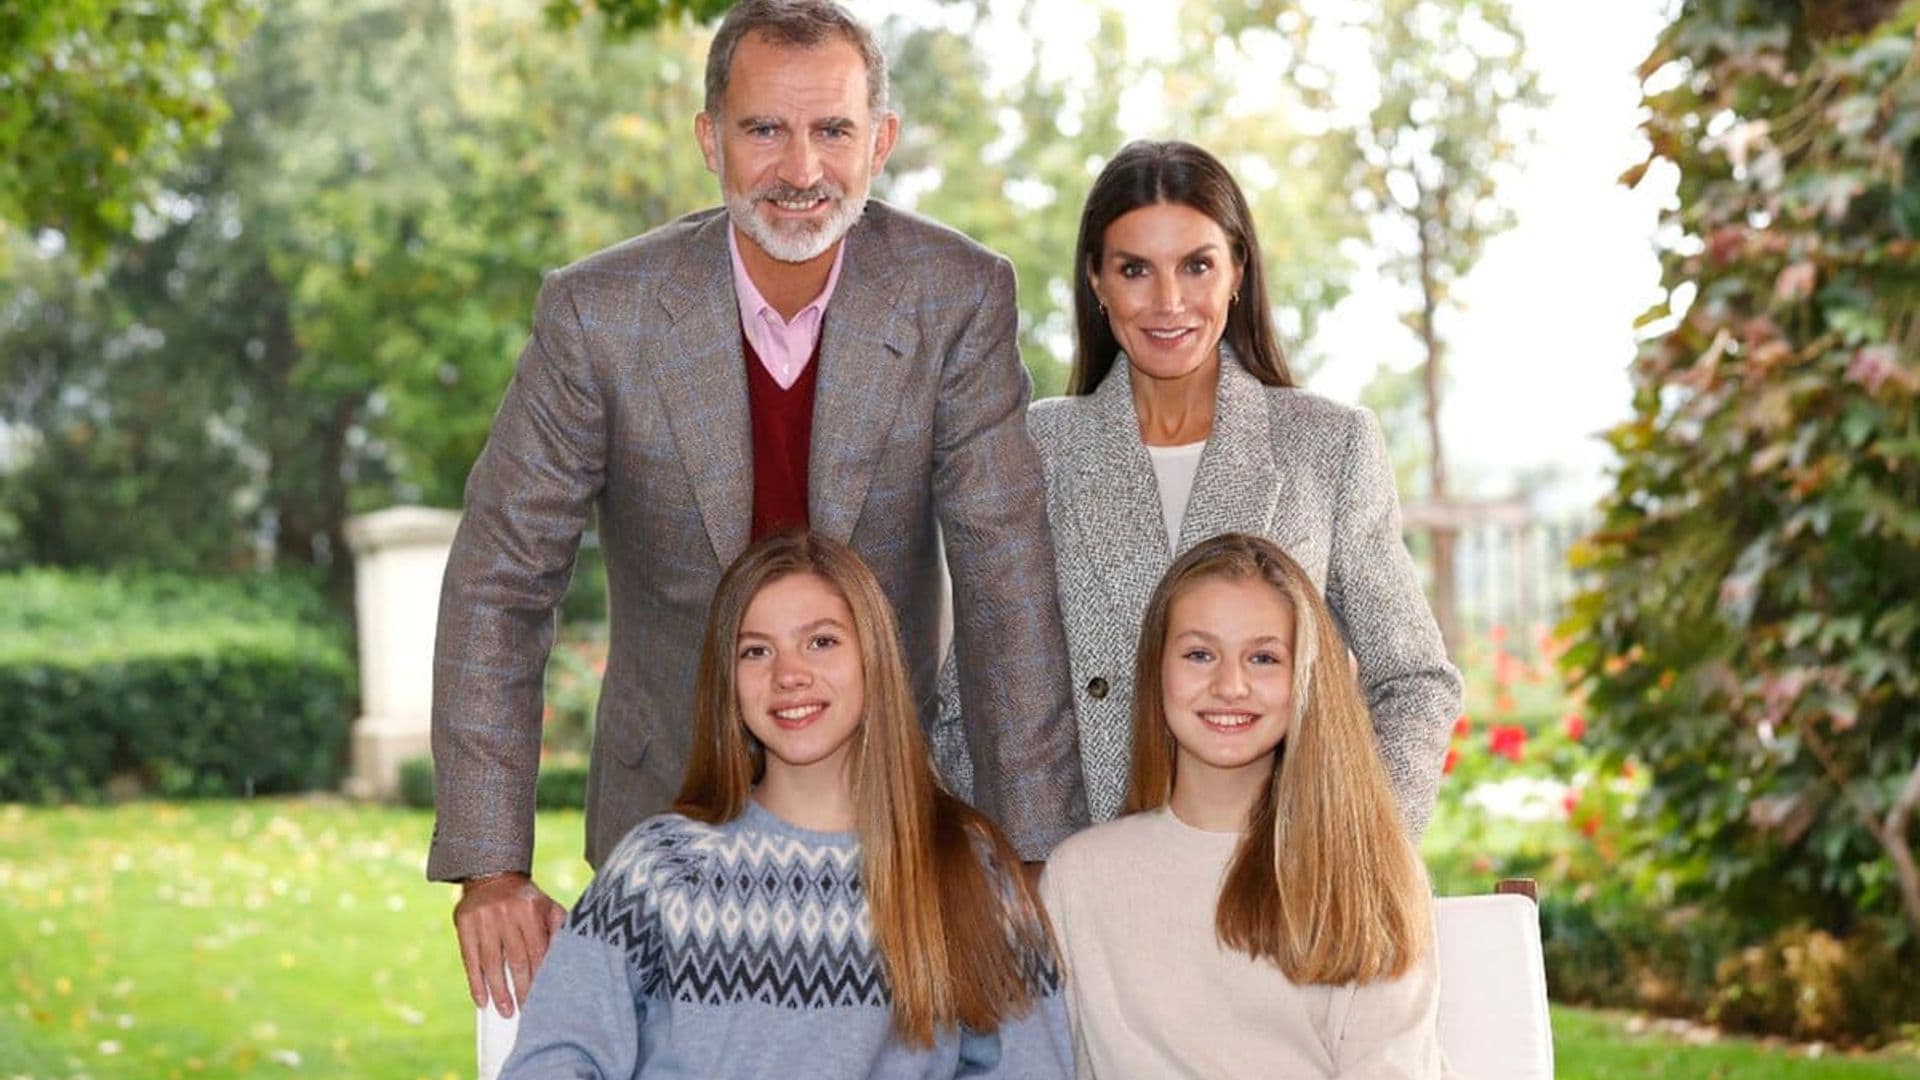 Spanish Princesses’ sisterly love on display in family Christmas card